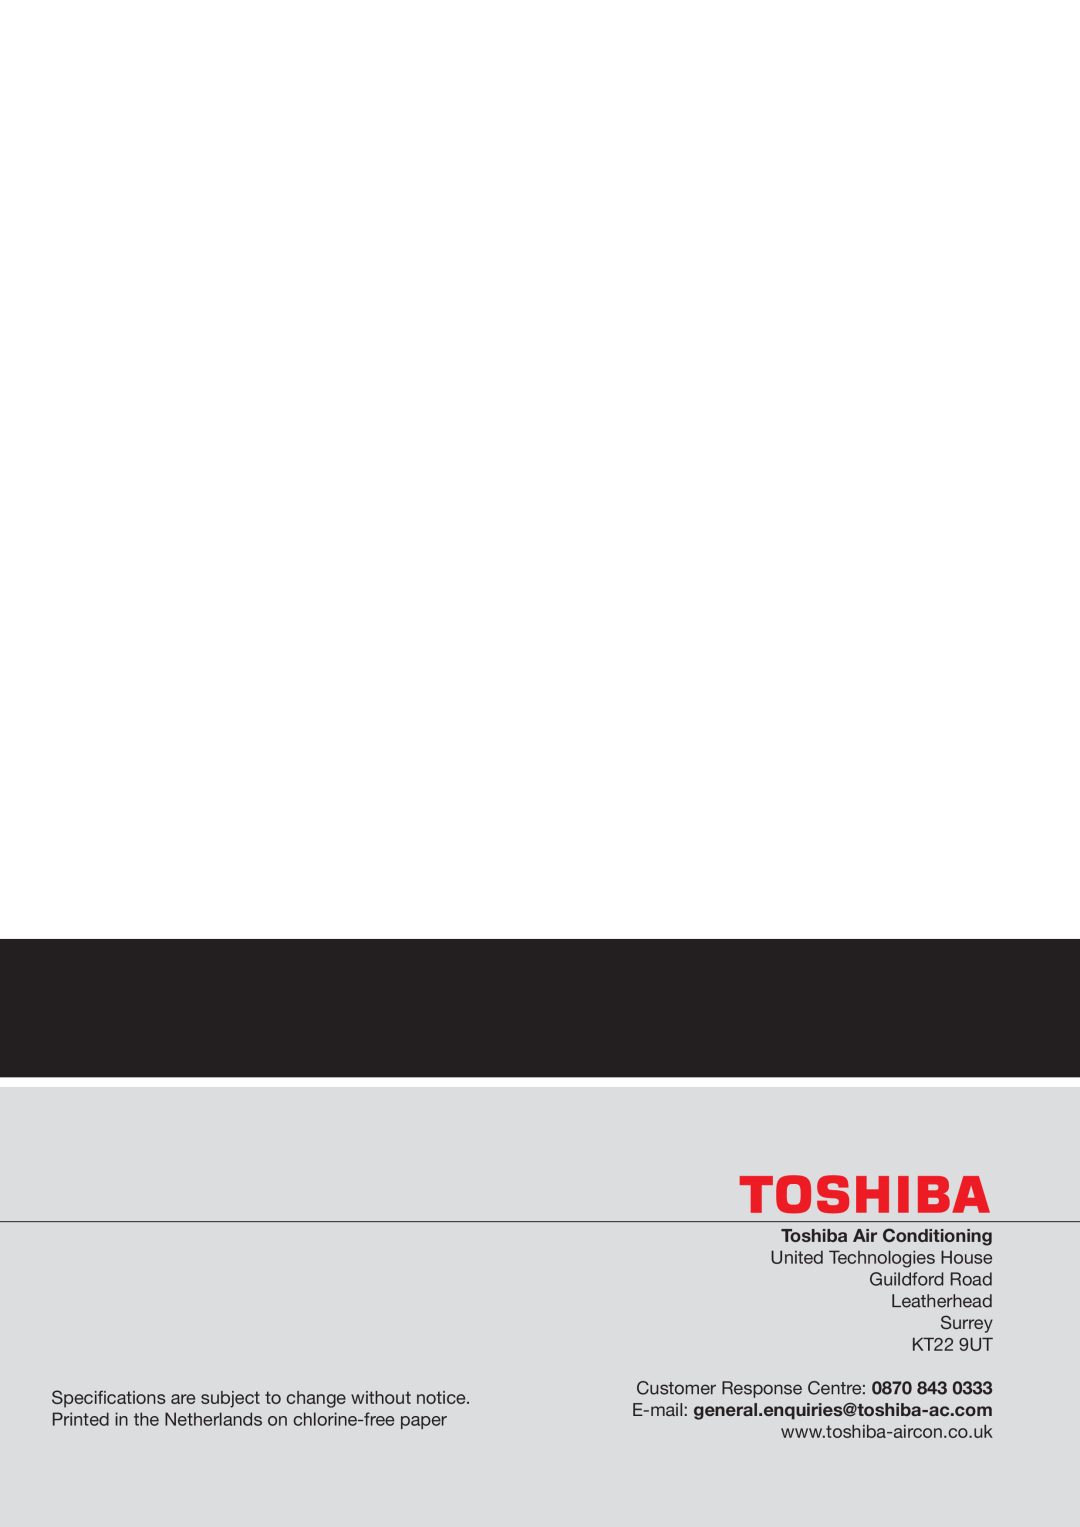 Toshiba HFC R-410A manual Toshiba Air Conditioning, United Technologies House Guildford Road, Leatherhead Surrey KT22 9UT 